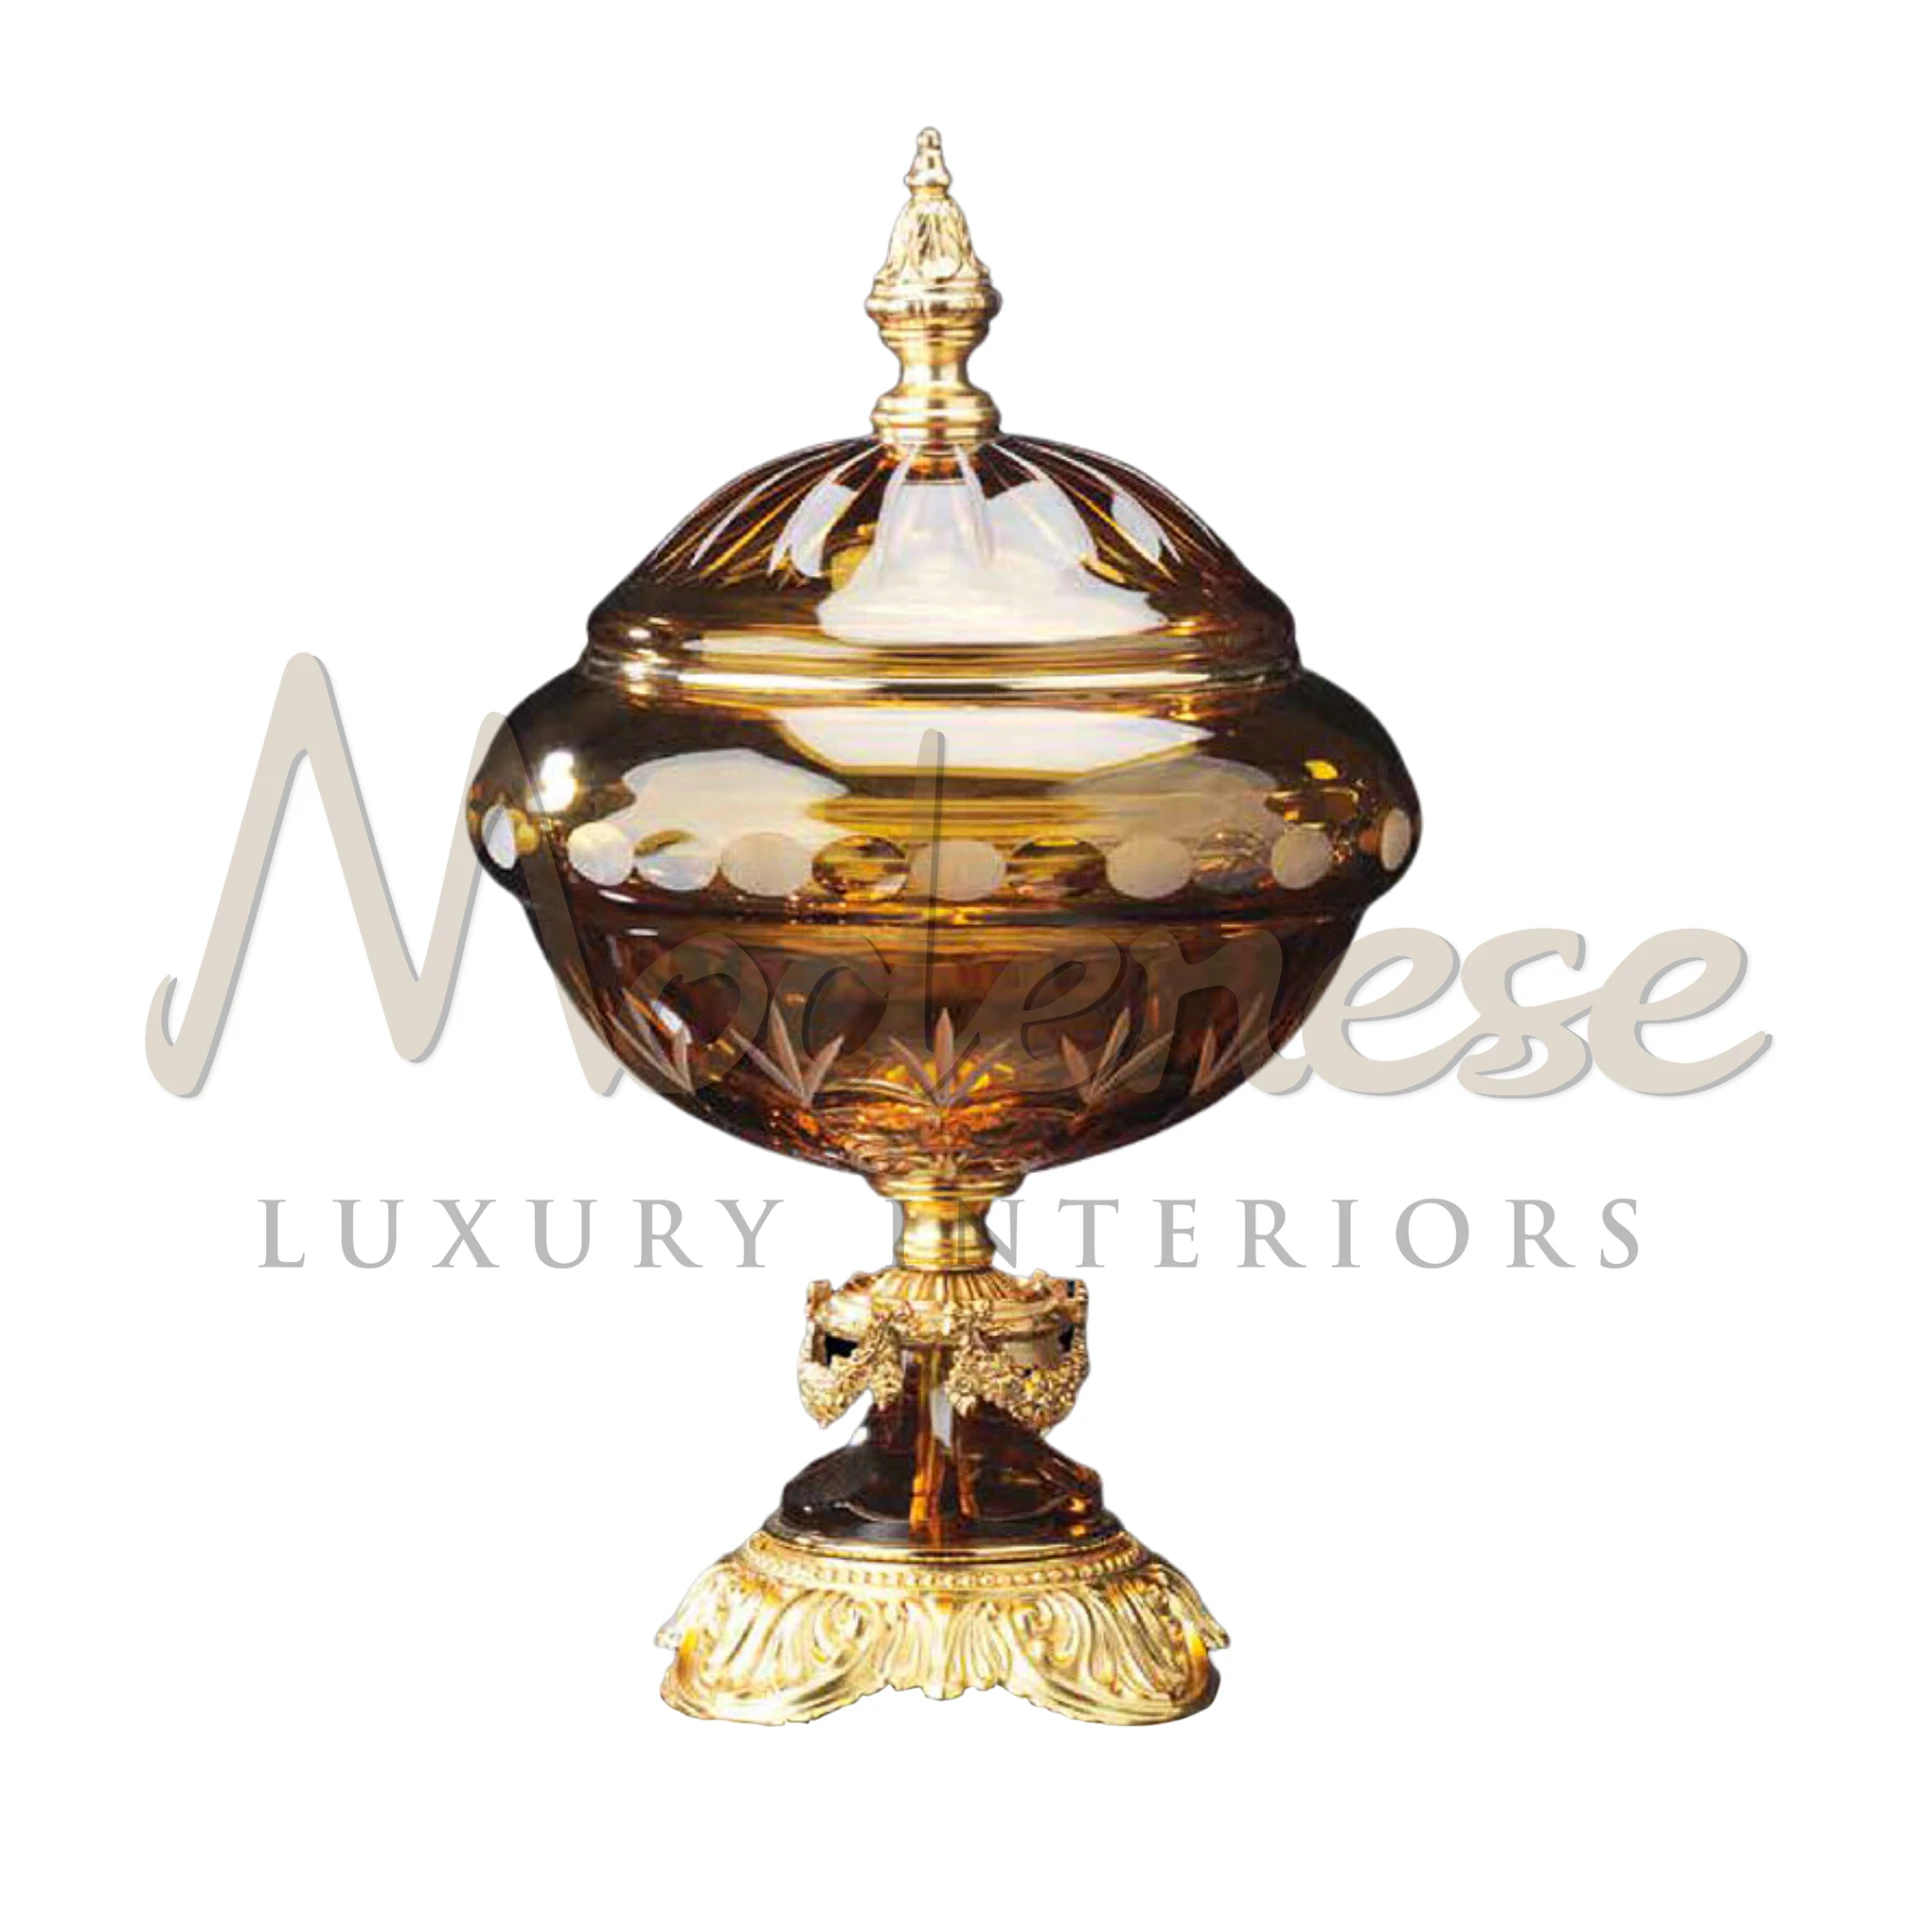 Roccoco Luxury Bowl by Modenese, crafted with exquisite detail, embodies opulent artistry for sophisticated luxury and classic interior designs.







